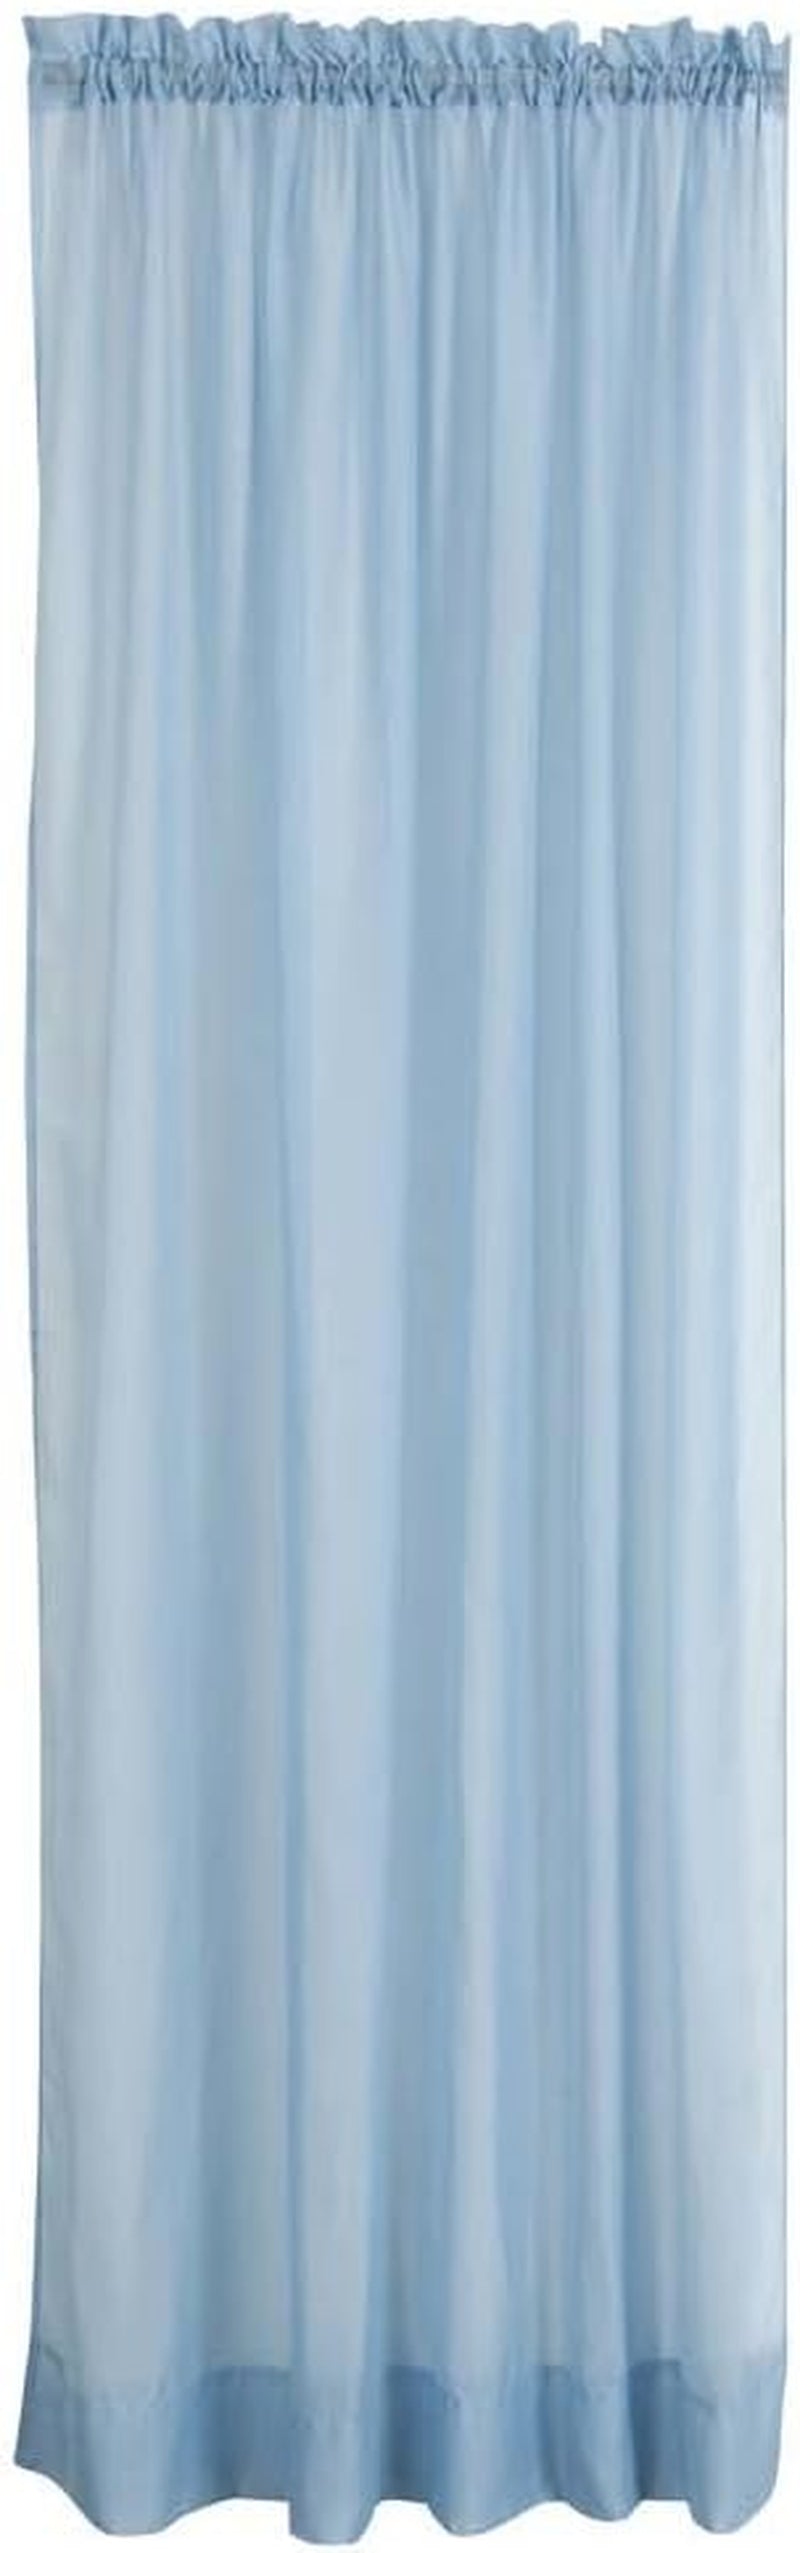 Stylemaster Splendor Pinch Pleated Drapes Pair, 2 of 60" by 84", White  Stylemaster Home Products Ocean 56 In X 84 In | Rod Pocket Panel 